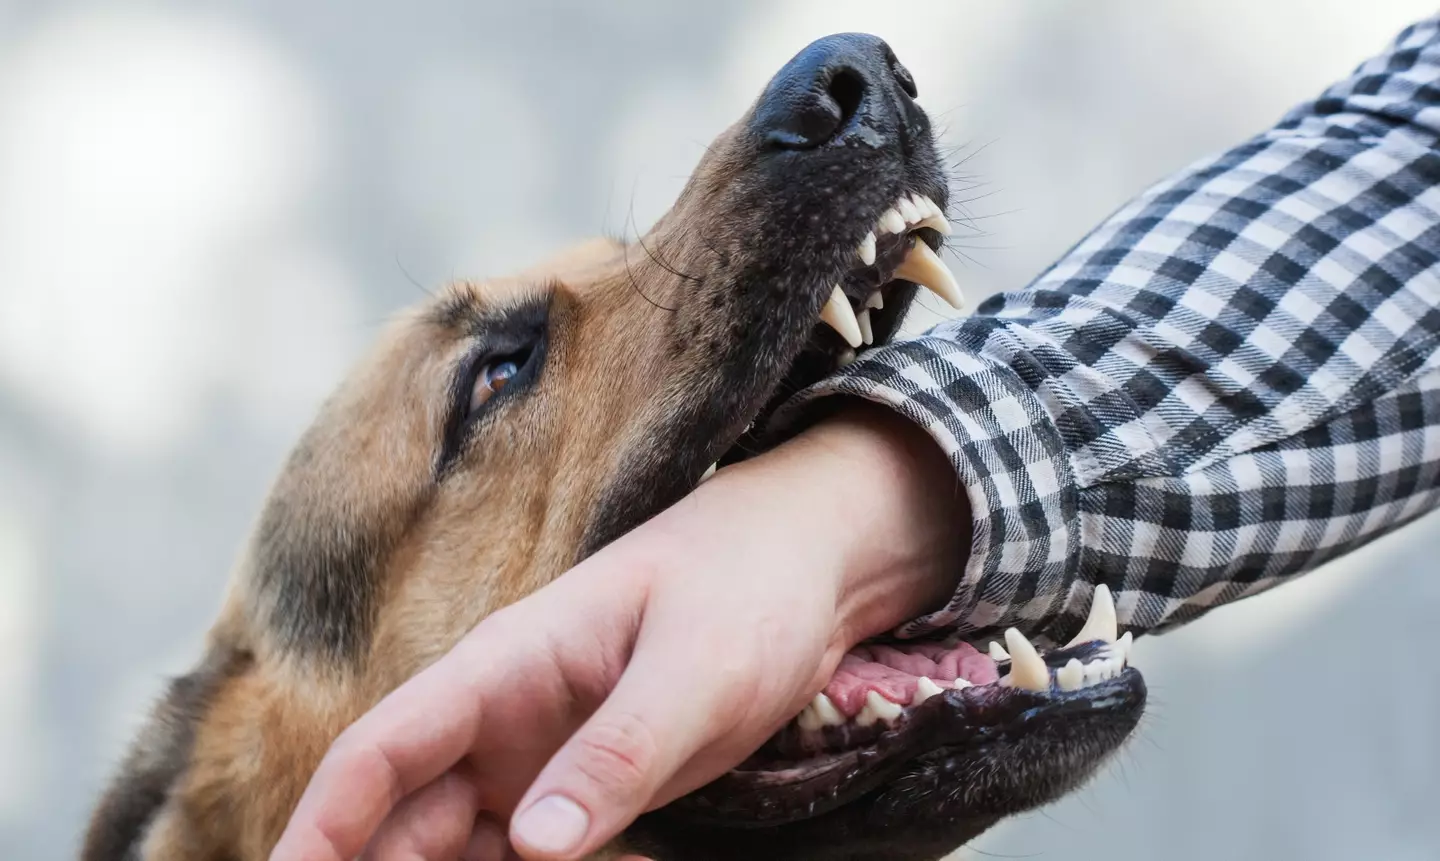 Dog bites hurt, but there's a way to stop them from being fatal.